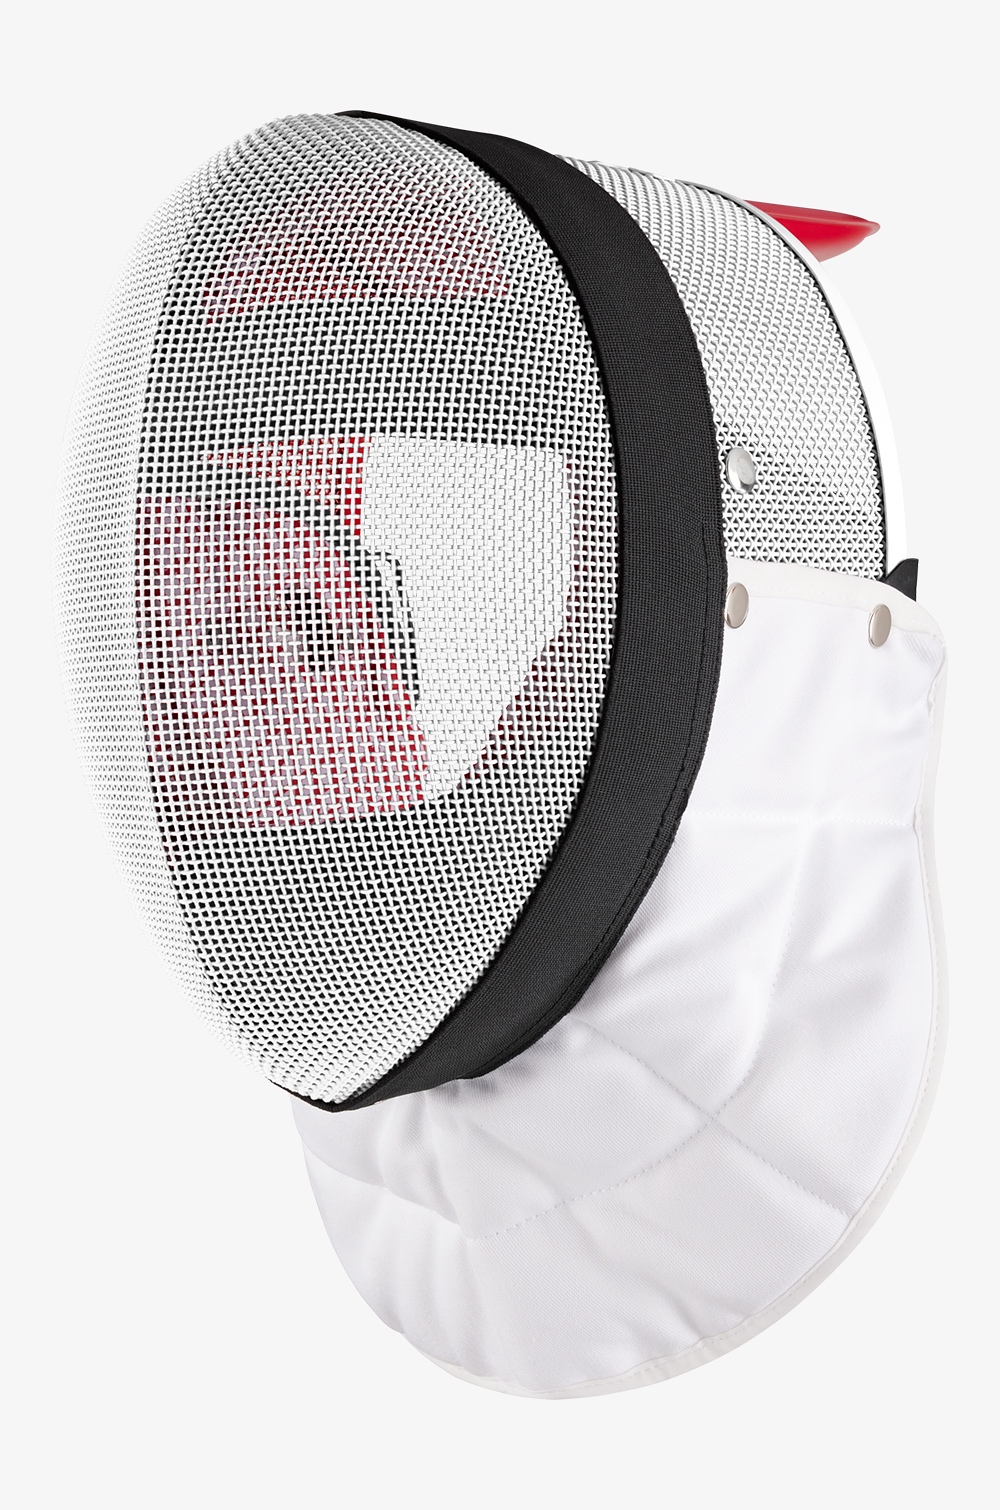 Colored Inox FIE Epee Mask